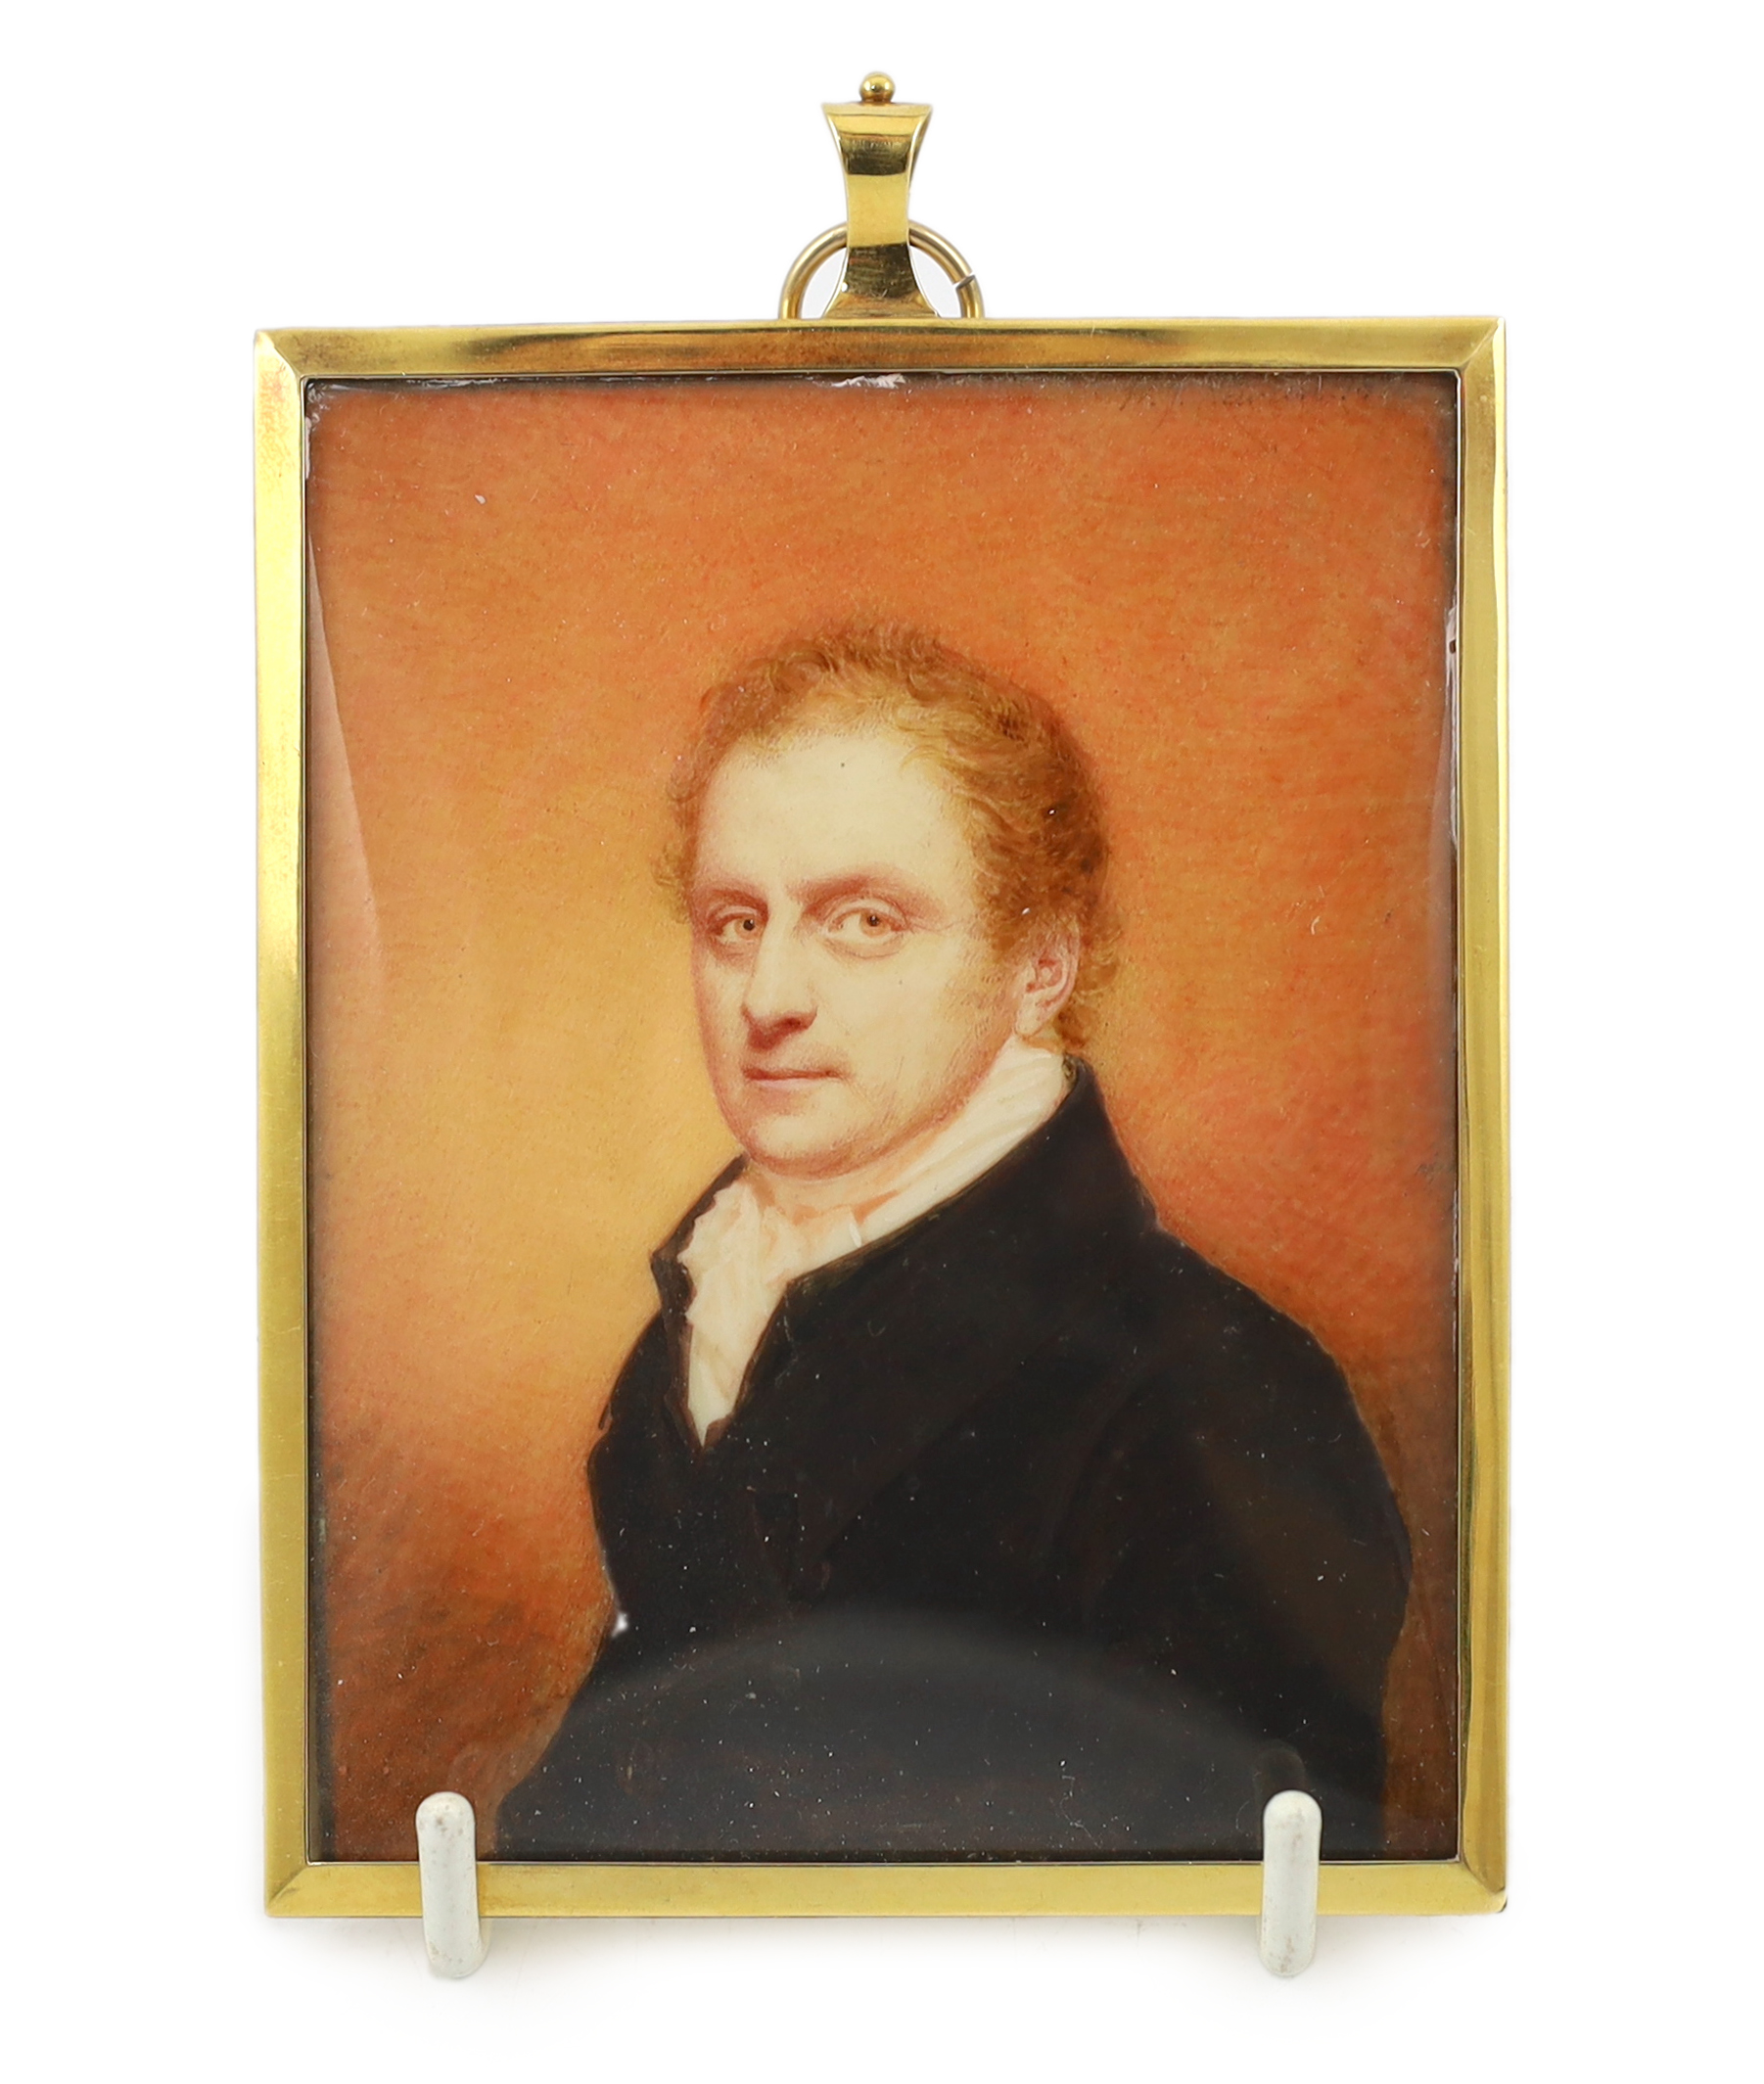 Sir William John Newton (1785-1869), Portrait miniature of a gentleman, watercolour on ivory, 9.2 x 7.1cm. CITES Submission reference A8KLW2RD